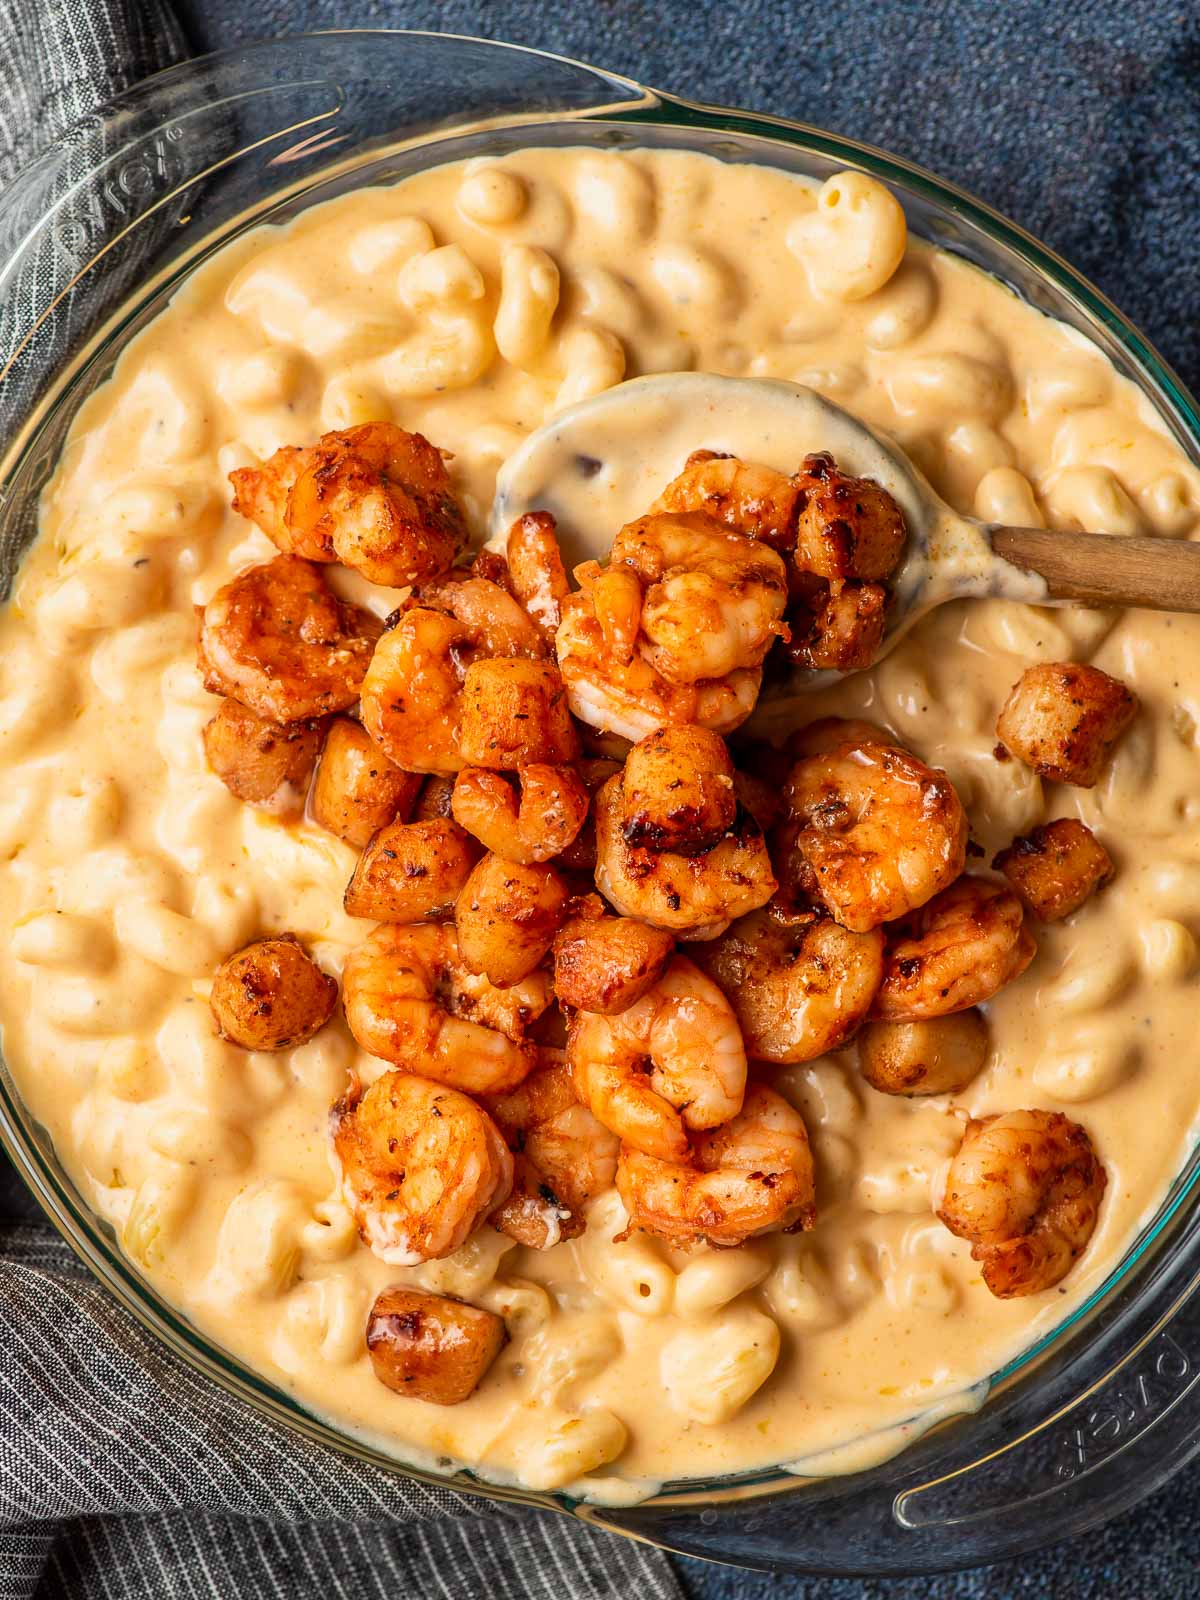 Creamy mac and cheese shown in a glass casserole dishwith seasoned shrimp and scallops on top.